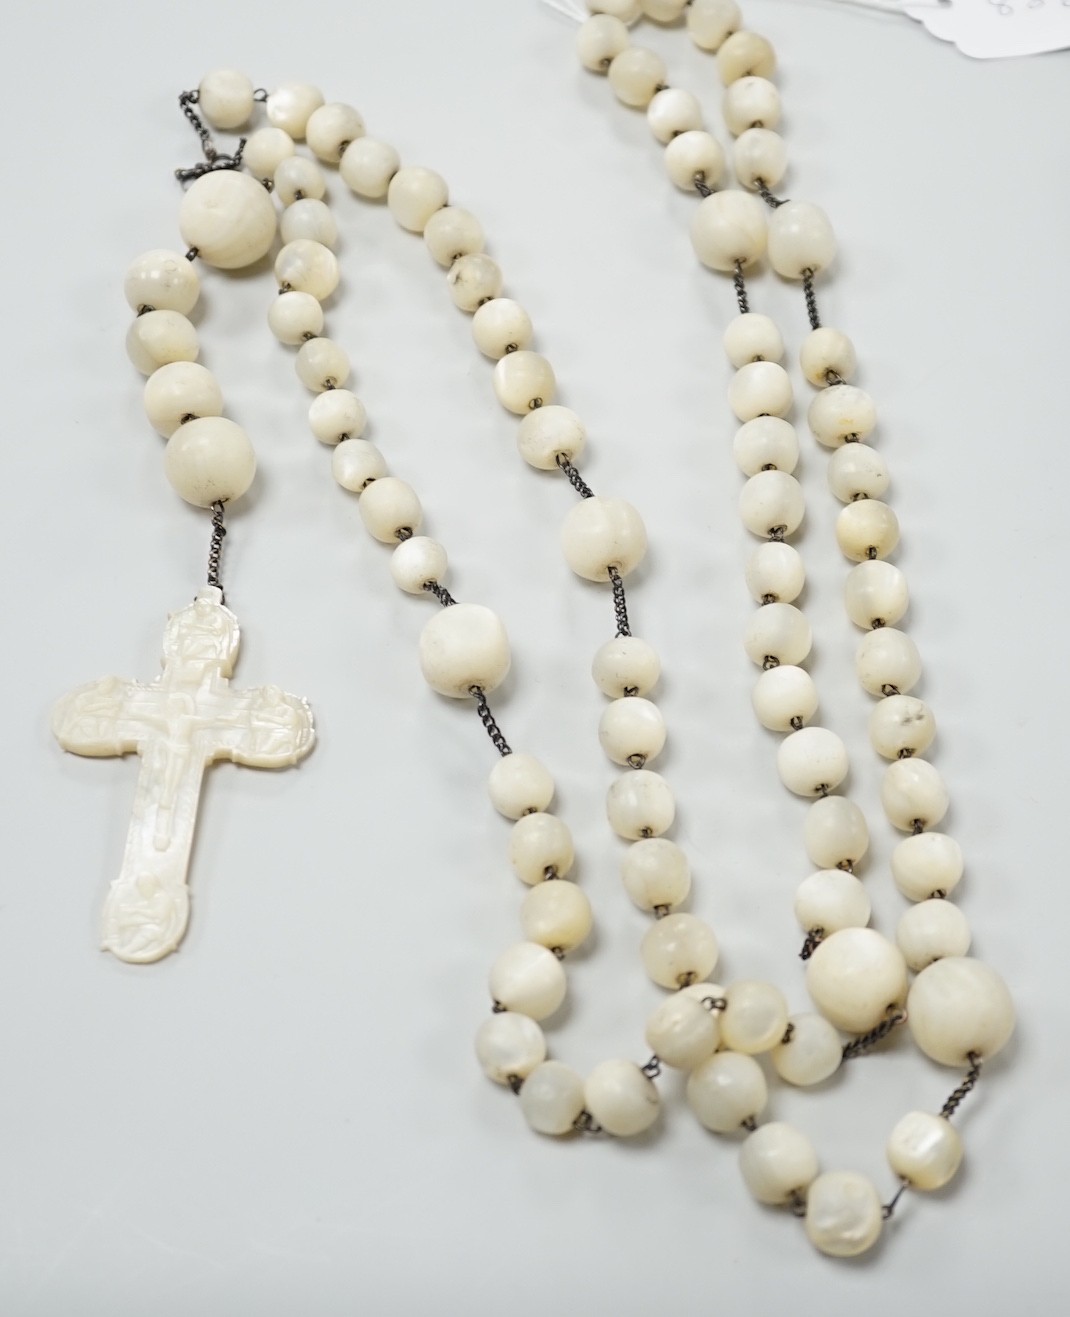 A long mother of pearl multi bead necklace, 158cm, with carved mother of pearl crucifix pendant, - Image 5 of 8